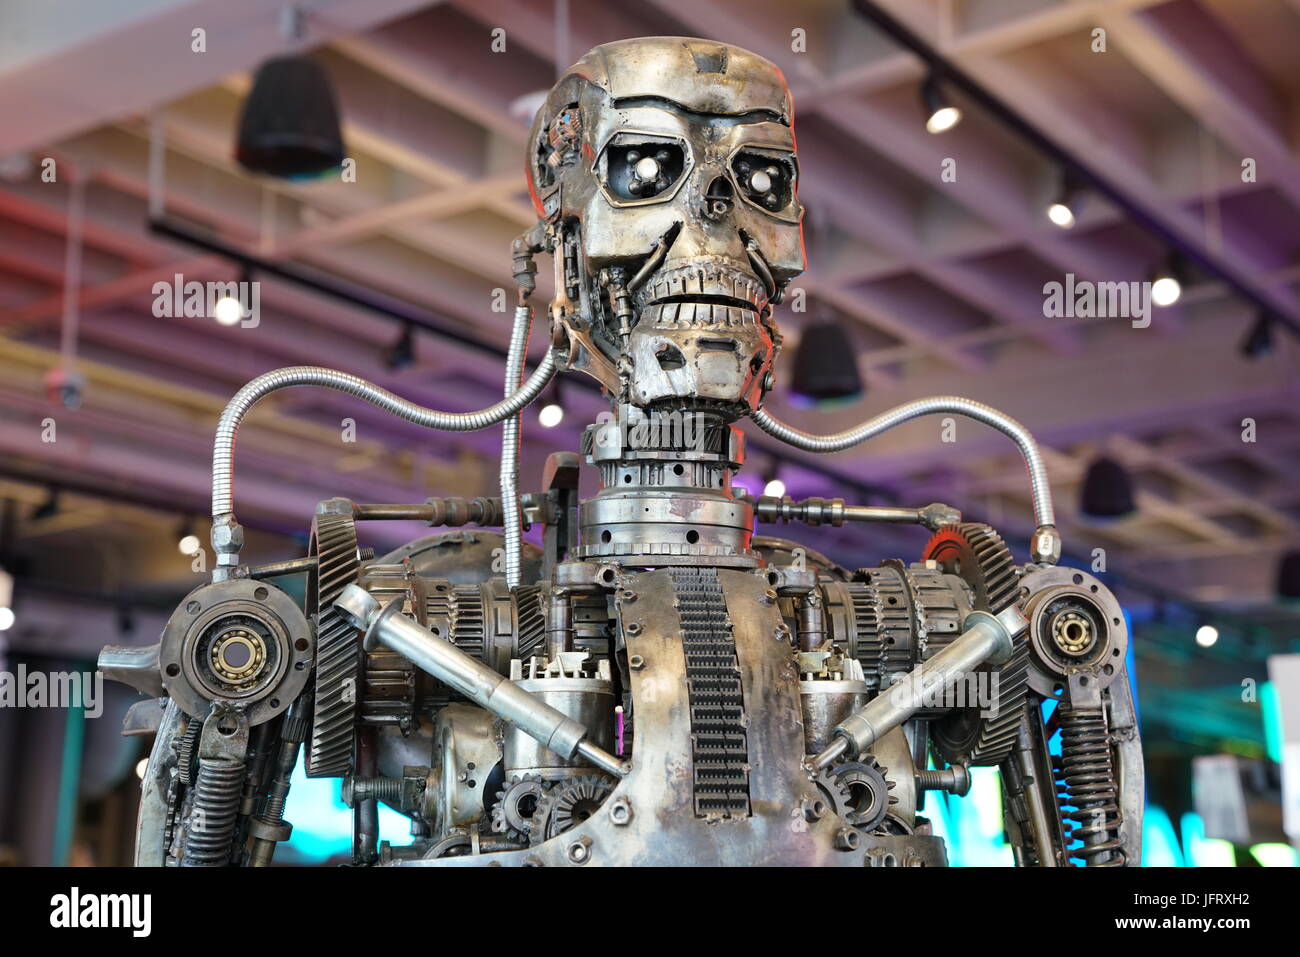 Los Angeles, California, USA - JUNE 25, 2017: Cyberdyne Systems Model 101 Series T-800 Terminator metal endoskeleton in the souvenirs gift shop Stock Photo